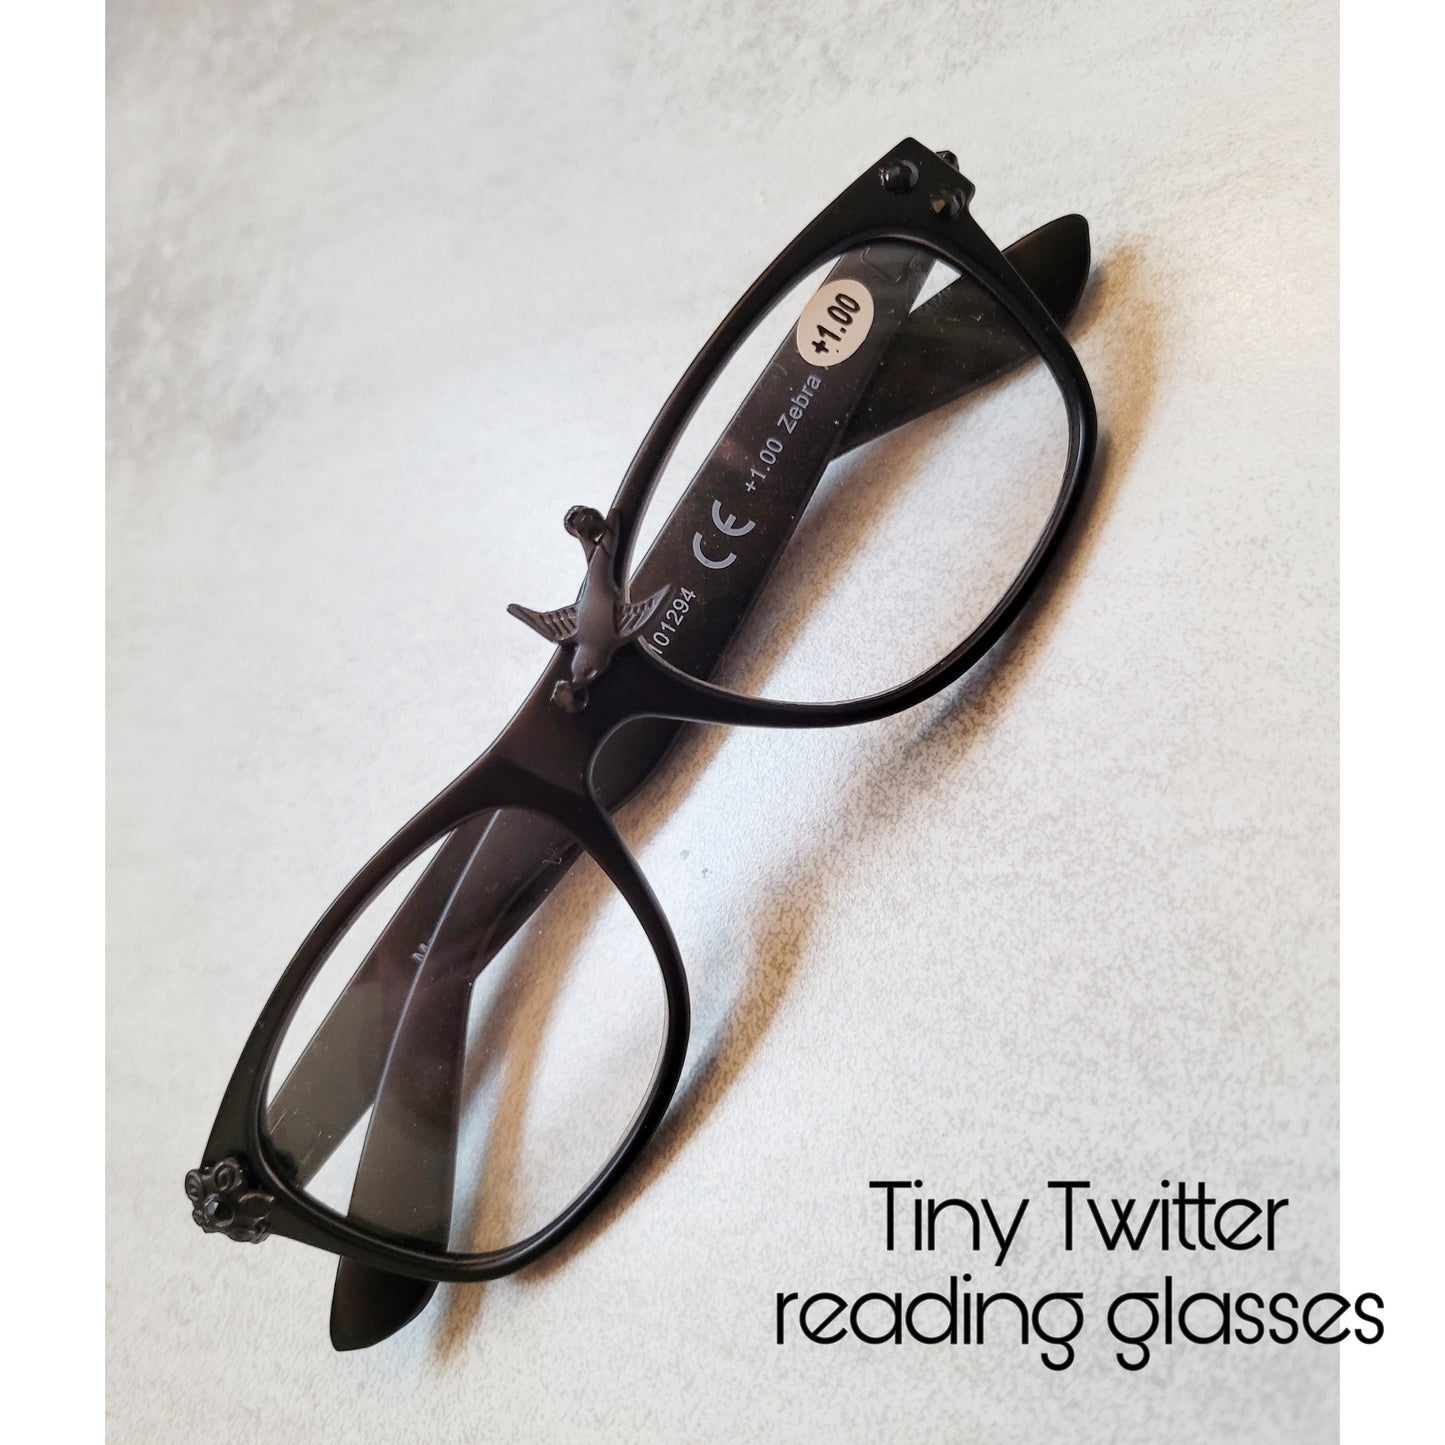 The Tiny Twitter reading glasses, limited edition unisex model (+1,0)